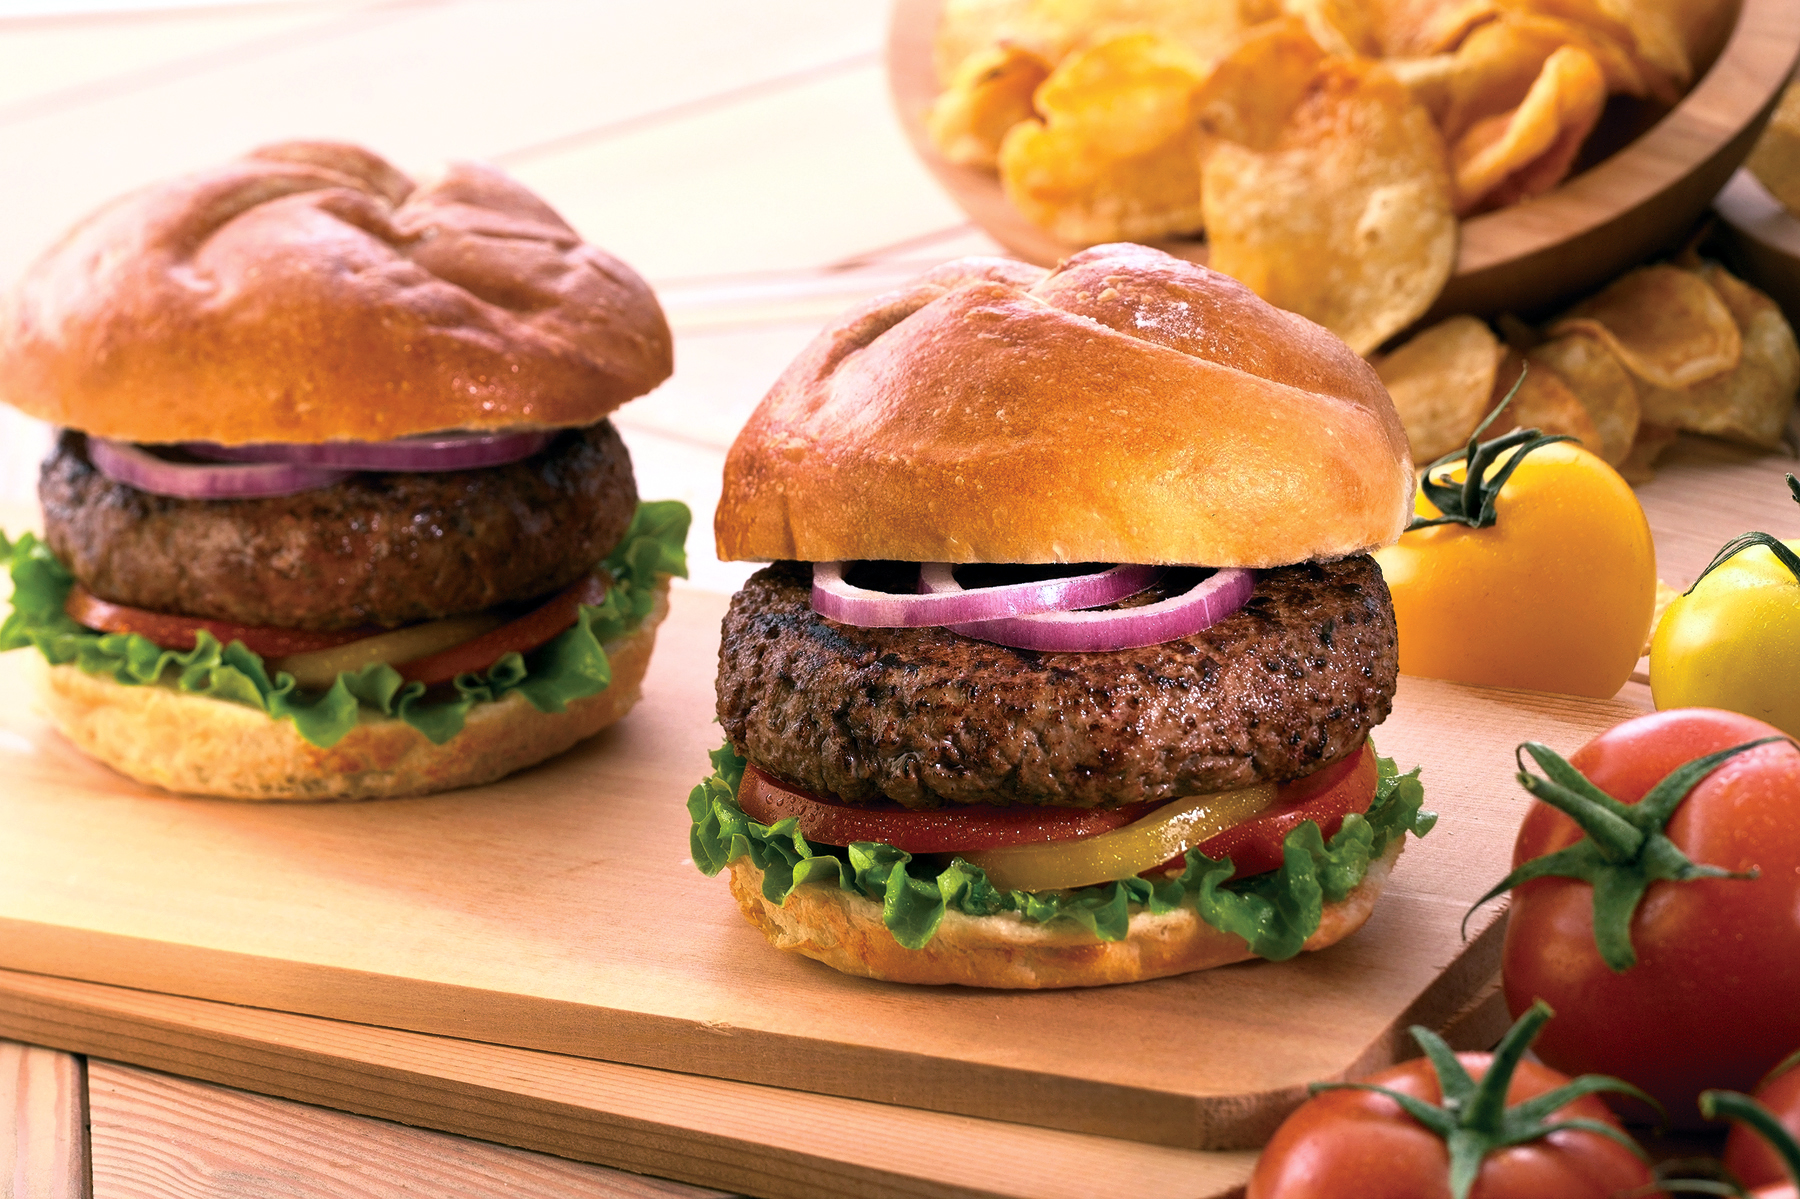 This recipe for All-American Lamb Burgers combines the flavors of fresh ground lamb, balsamic vinegar, garlic, herbs and spices, resulting in a mouthwateringly juicy burger that your guests will love.